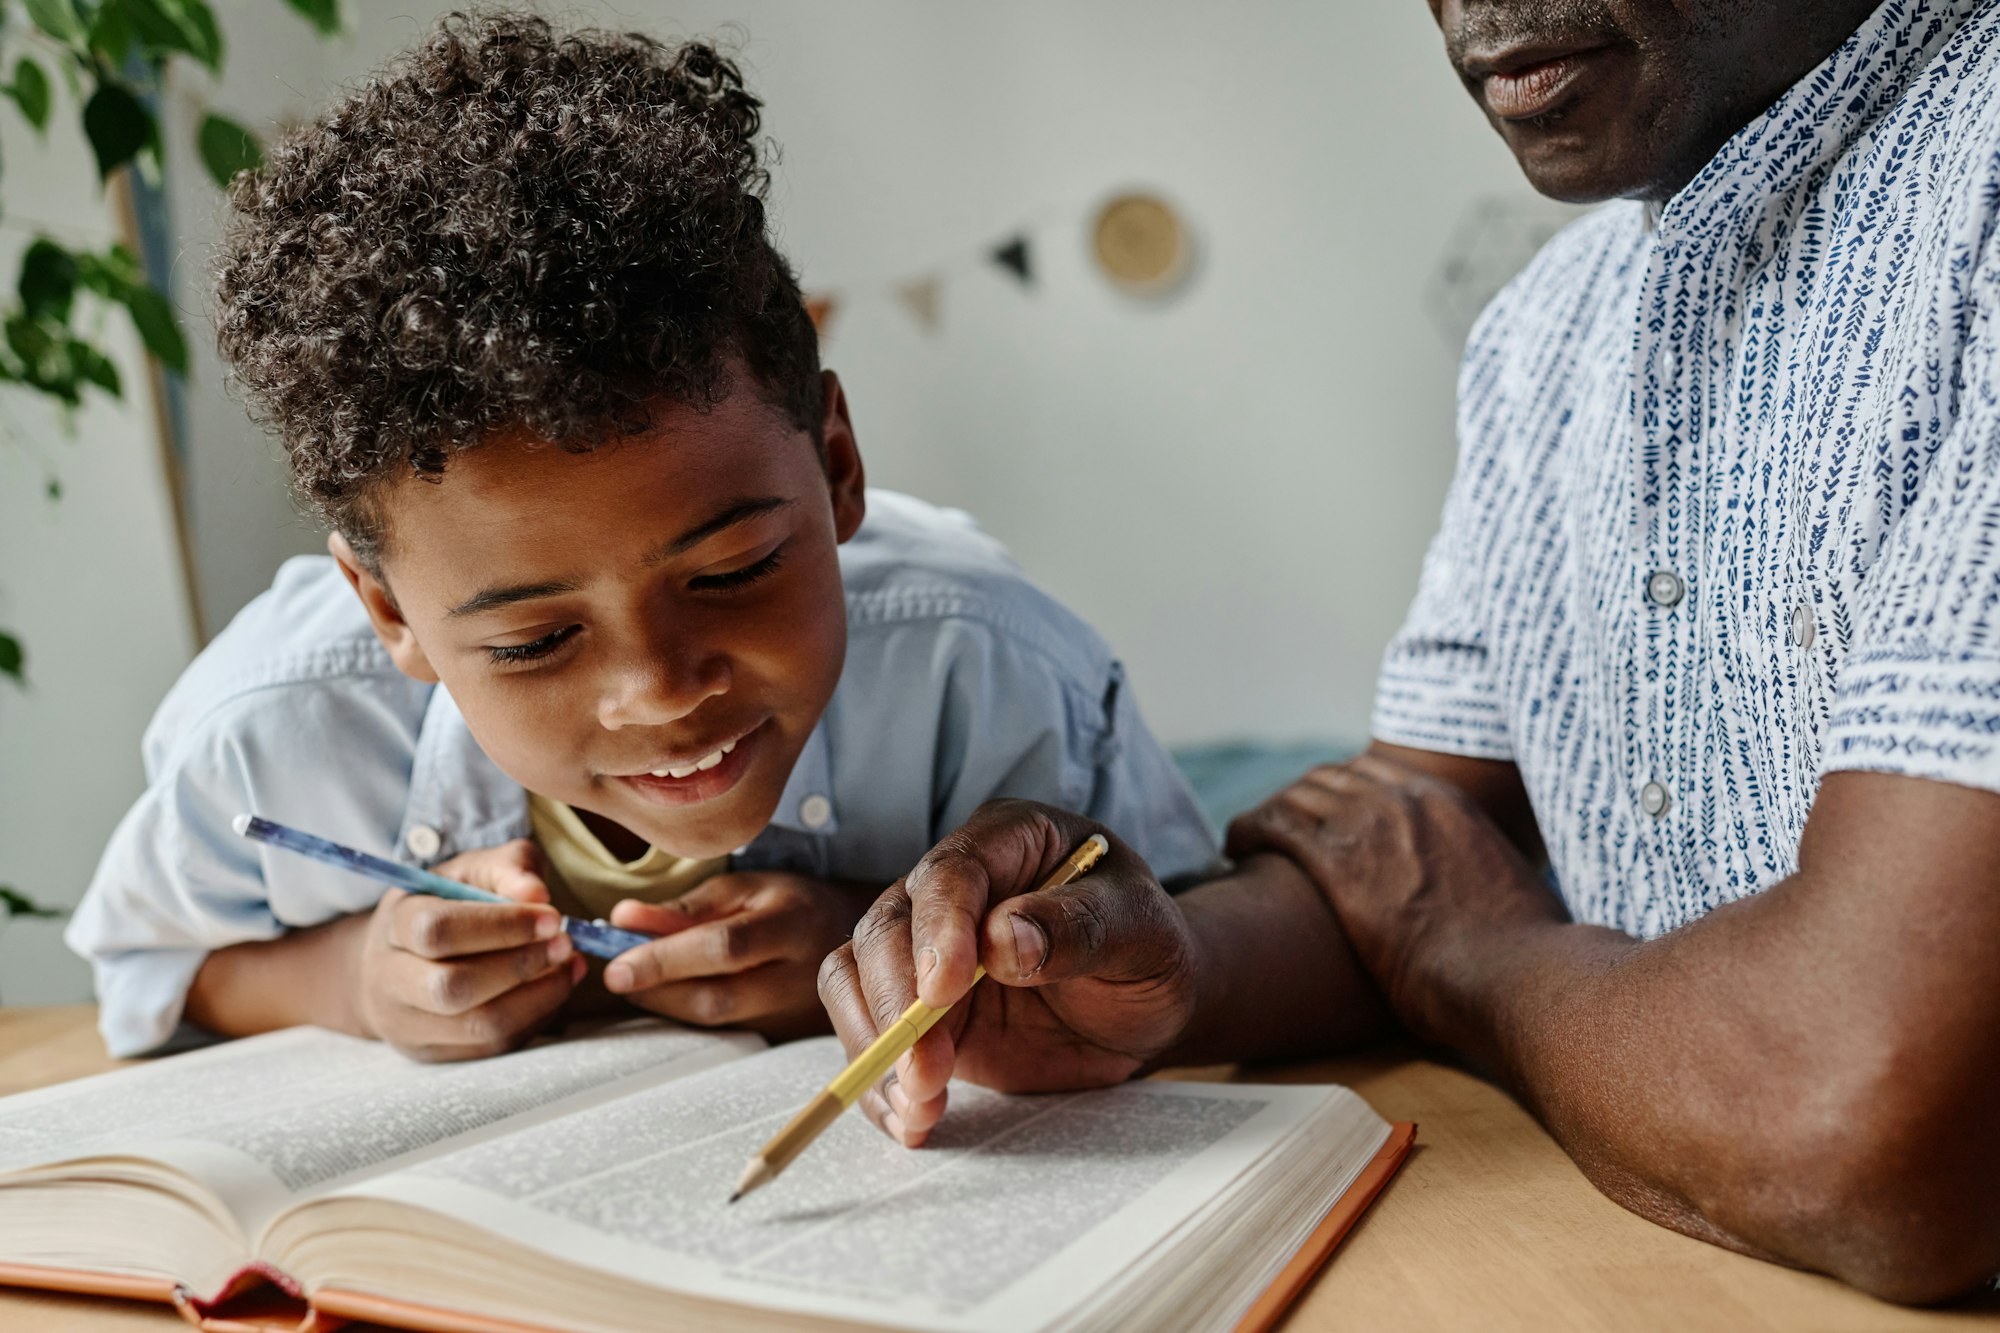 Boy reading book together with teacher